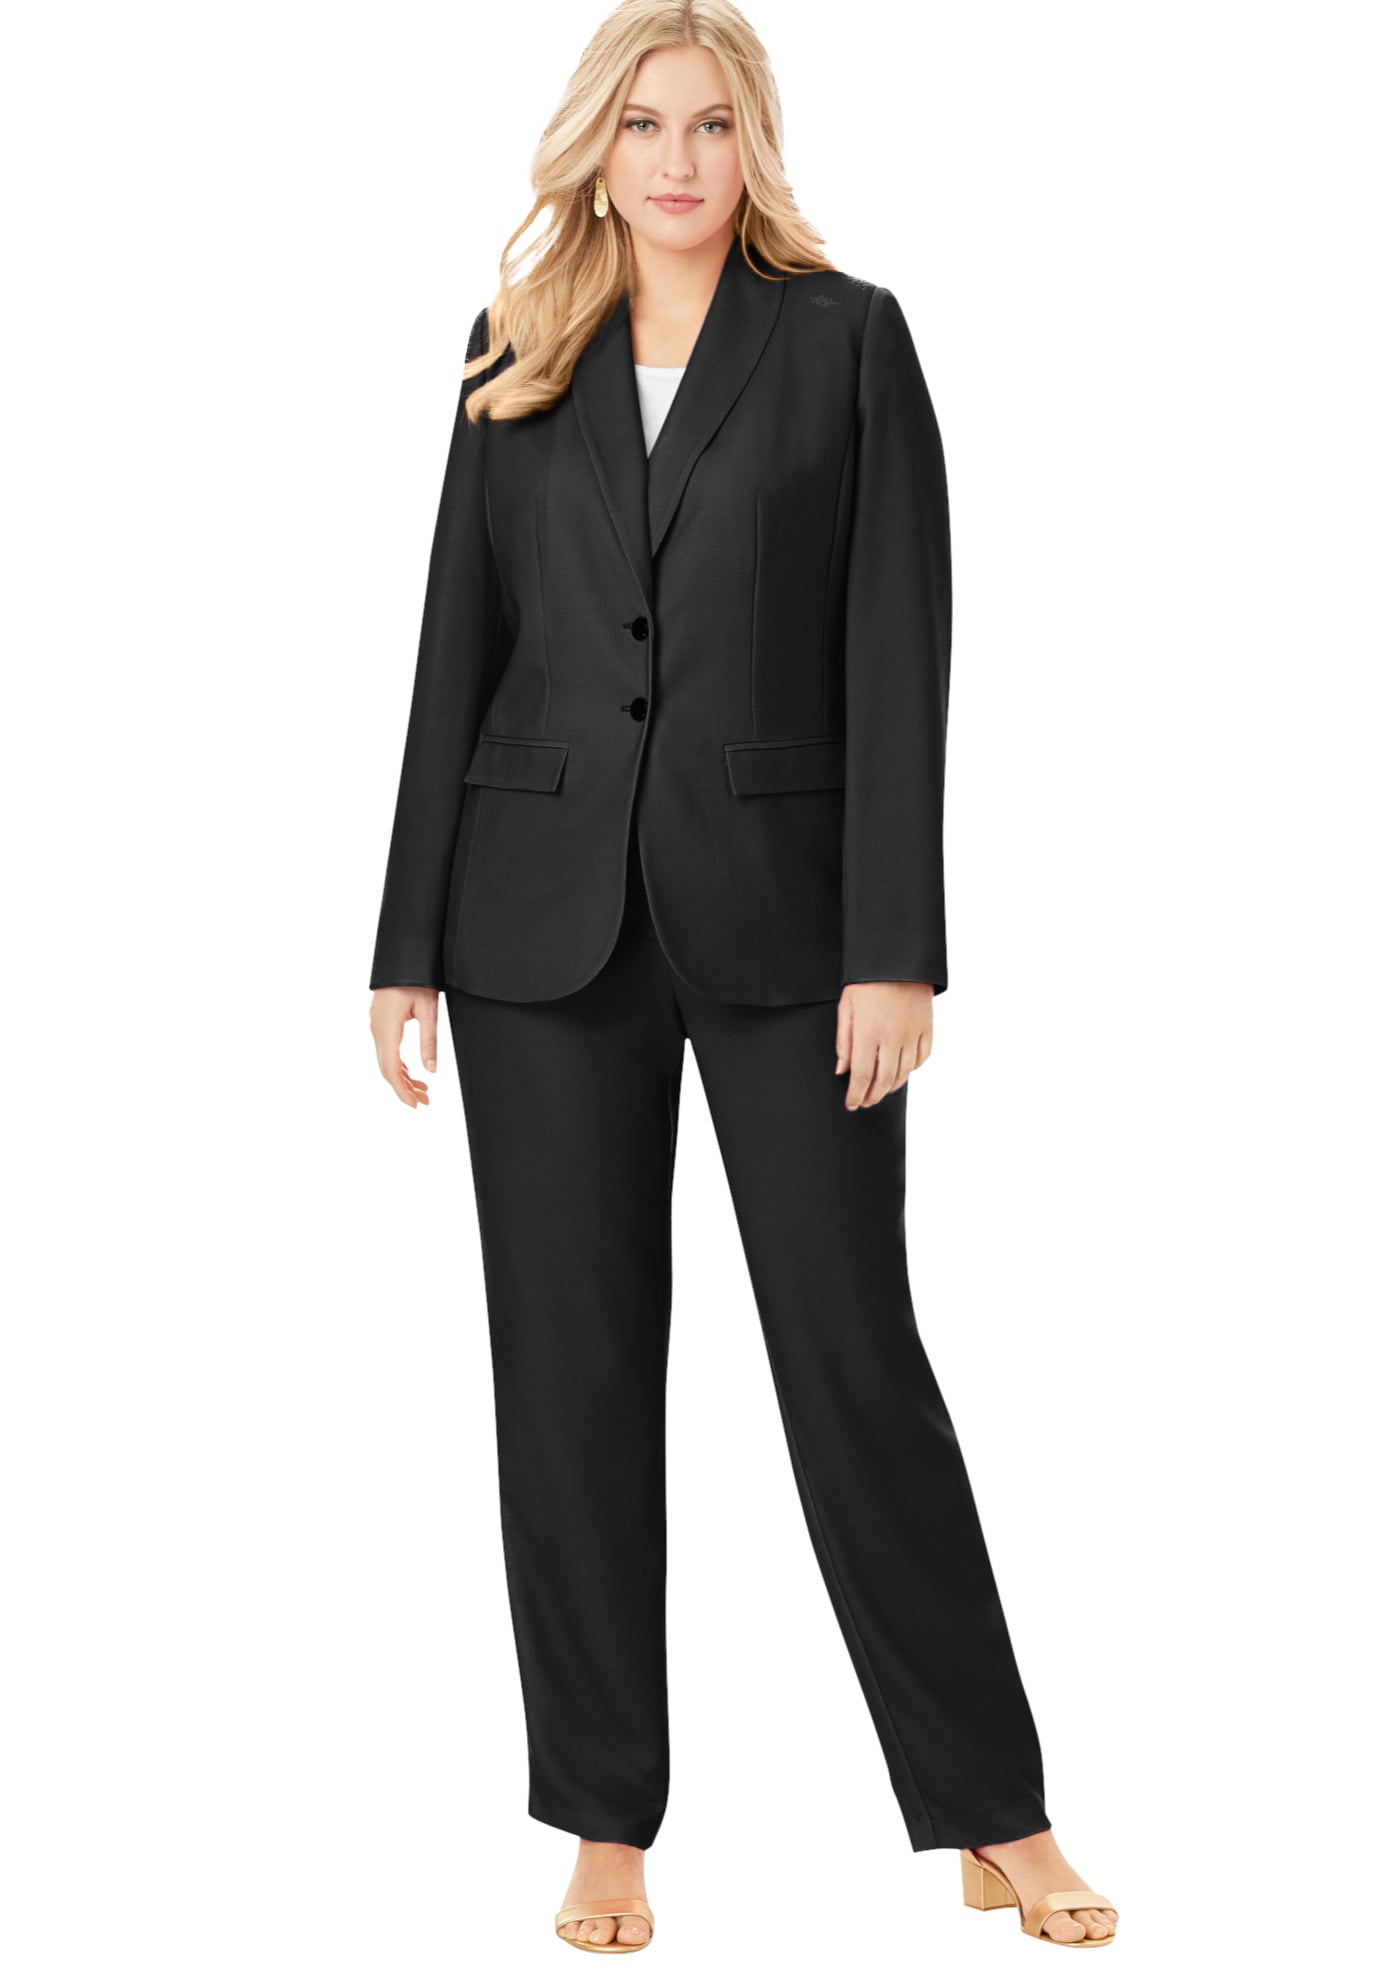 Jessica London Womens Plus Size Single Breasted Pant Suit Set 